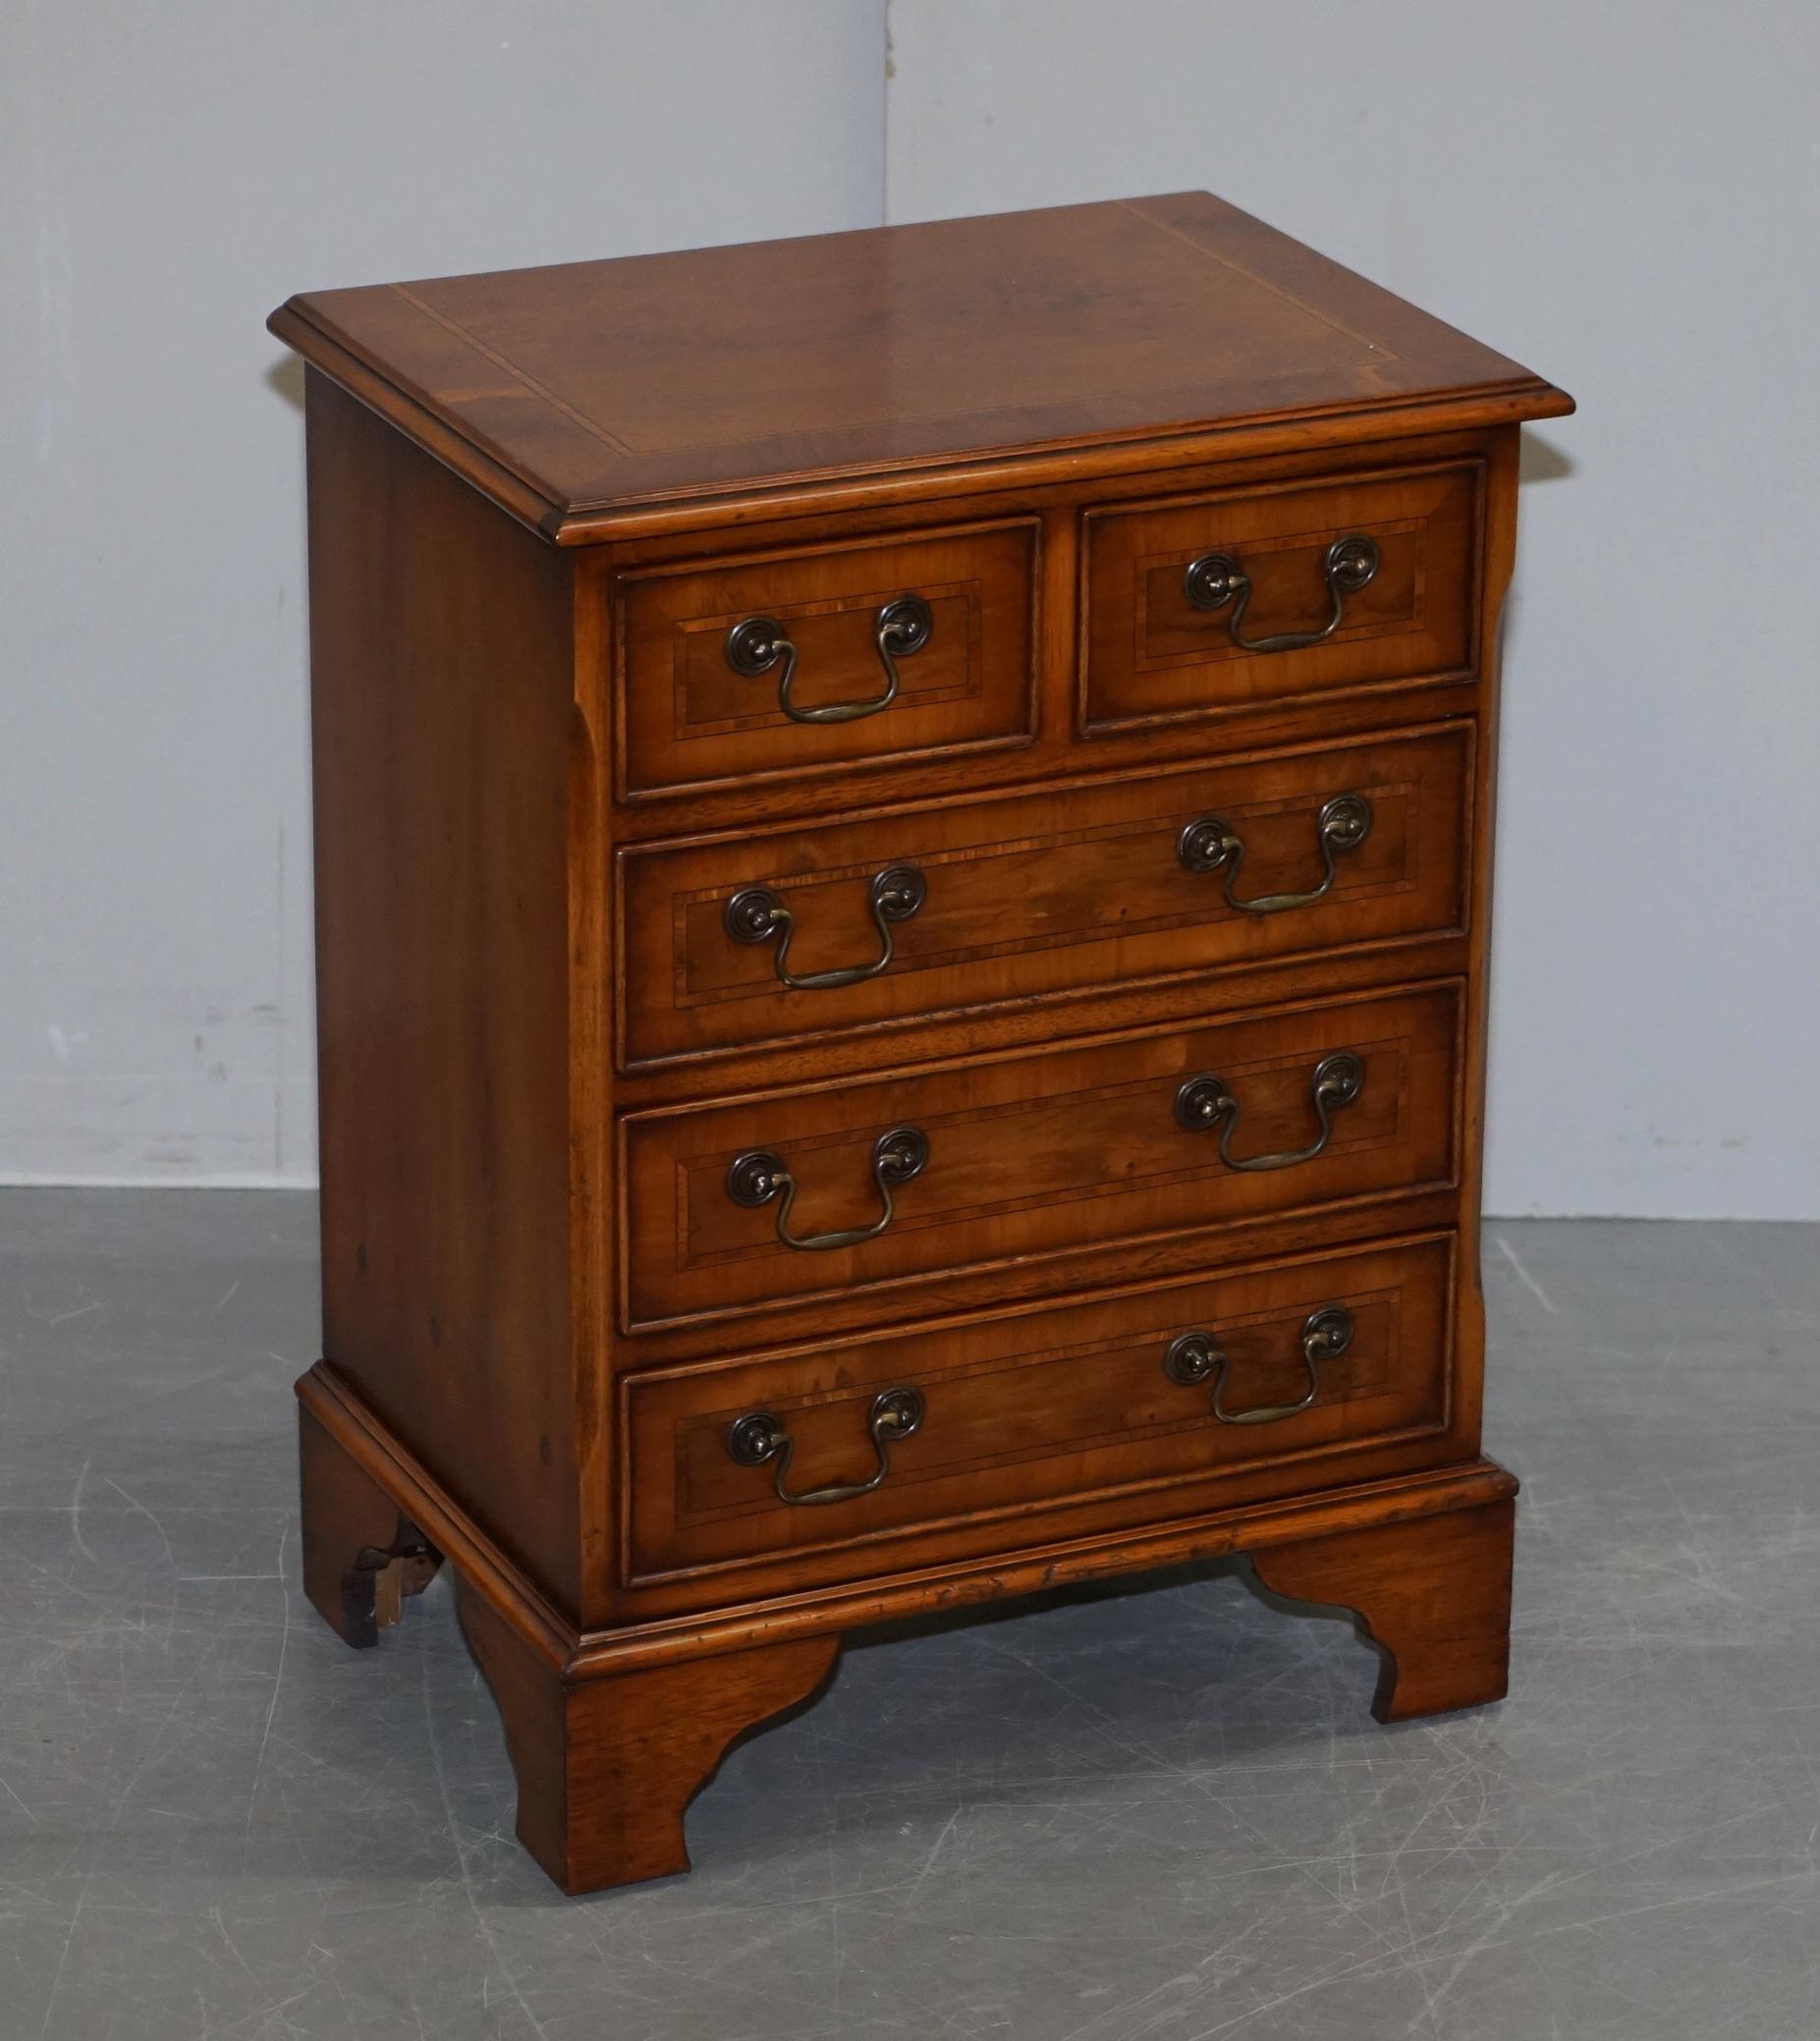 We are delighted to offer for sale this lovely pair of vintage burr yew wood lamp table sized chest of drawers

A good looking, functional and well made pair, the drawers all open and close as they should, the timber patina is glorious and looks